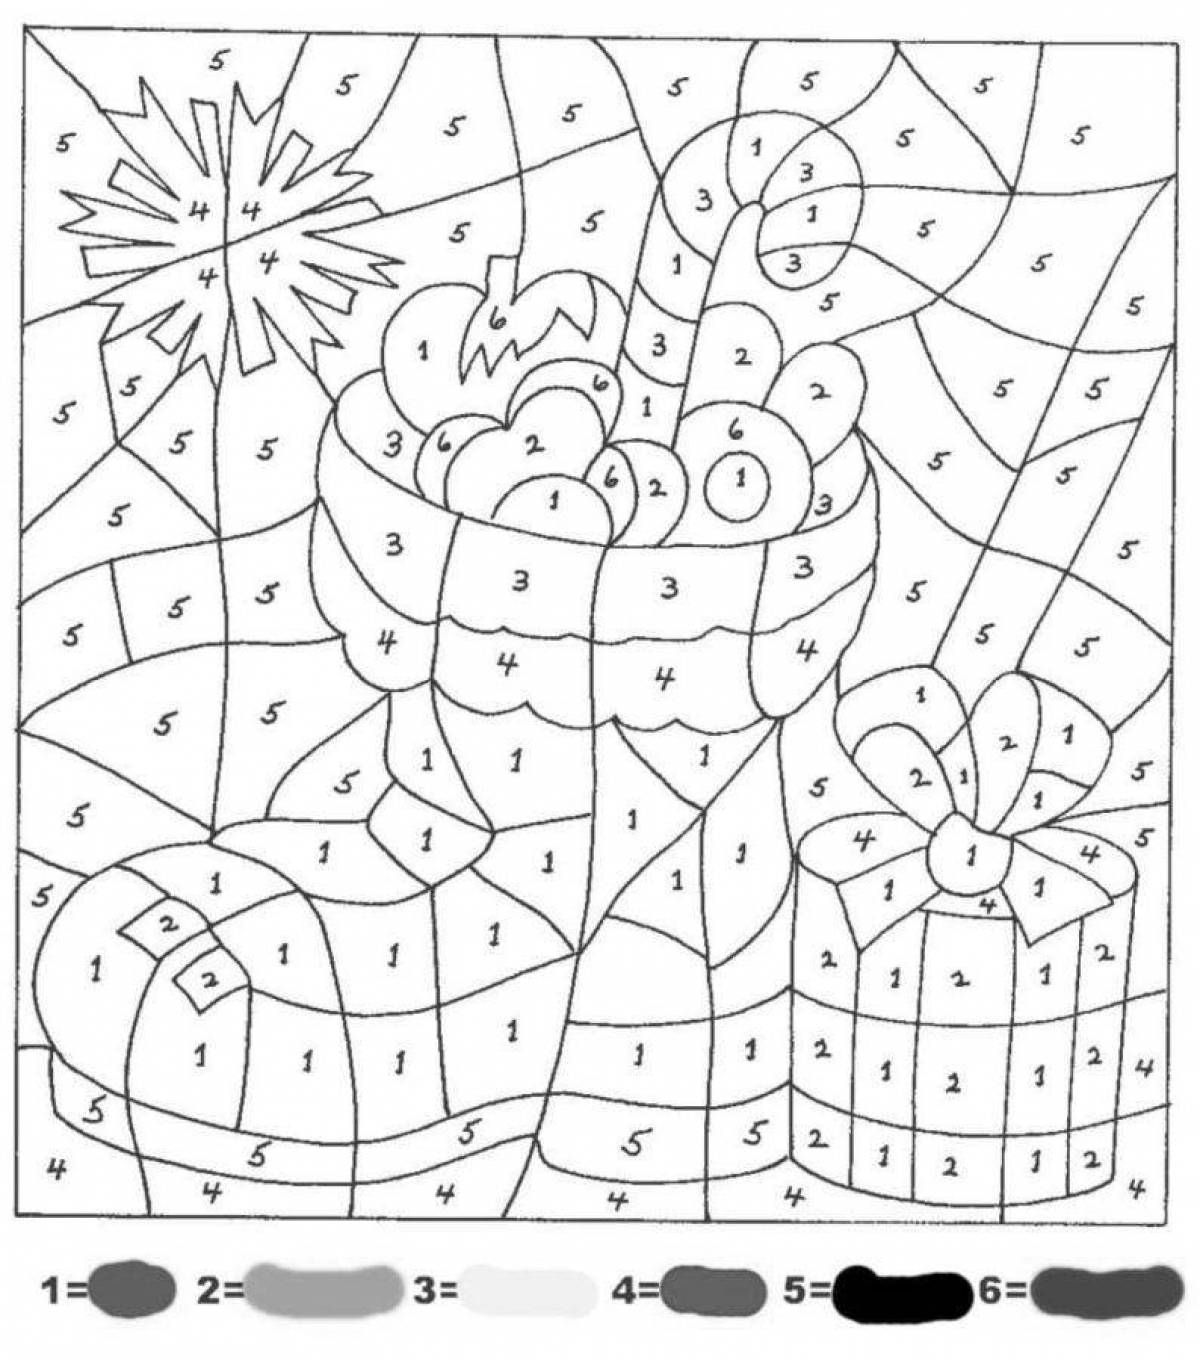 Exquisite santa claus coloring by numbers